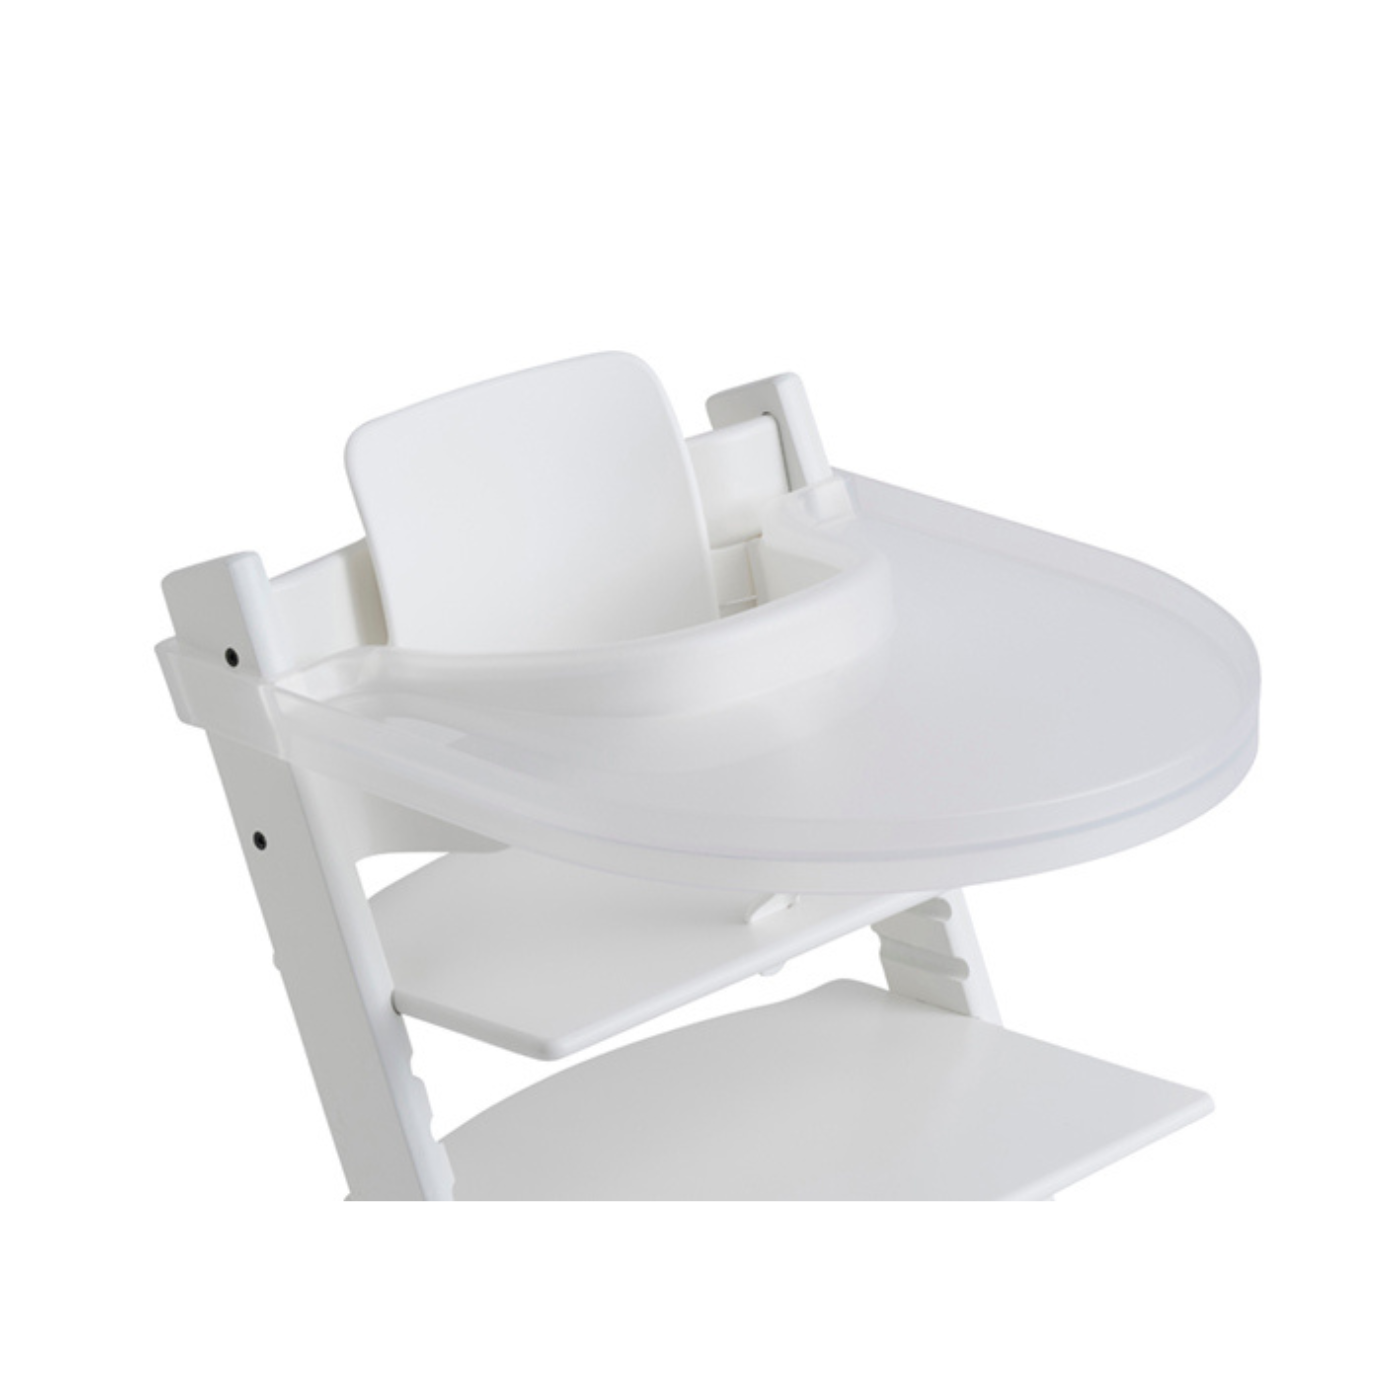 Playtray Tray For Stokke Tripp Trapp Chair